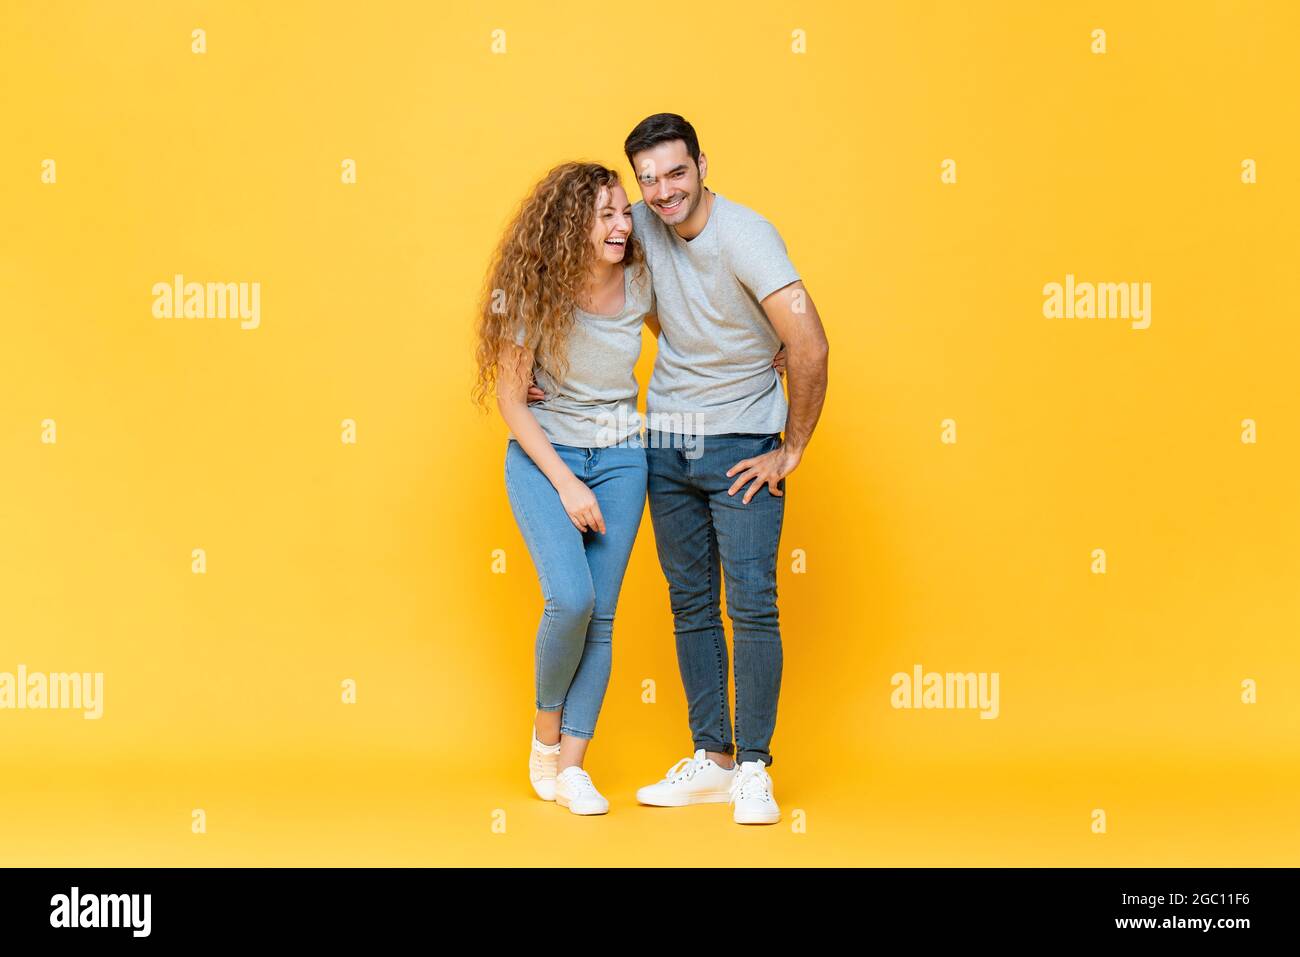 Full length portrait of young happy interracial millennial couple holding each other and laughing in isolated yellow studio background Stock Photo